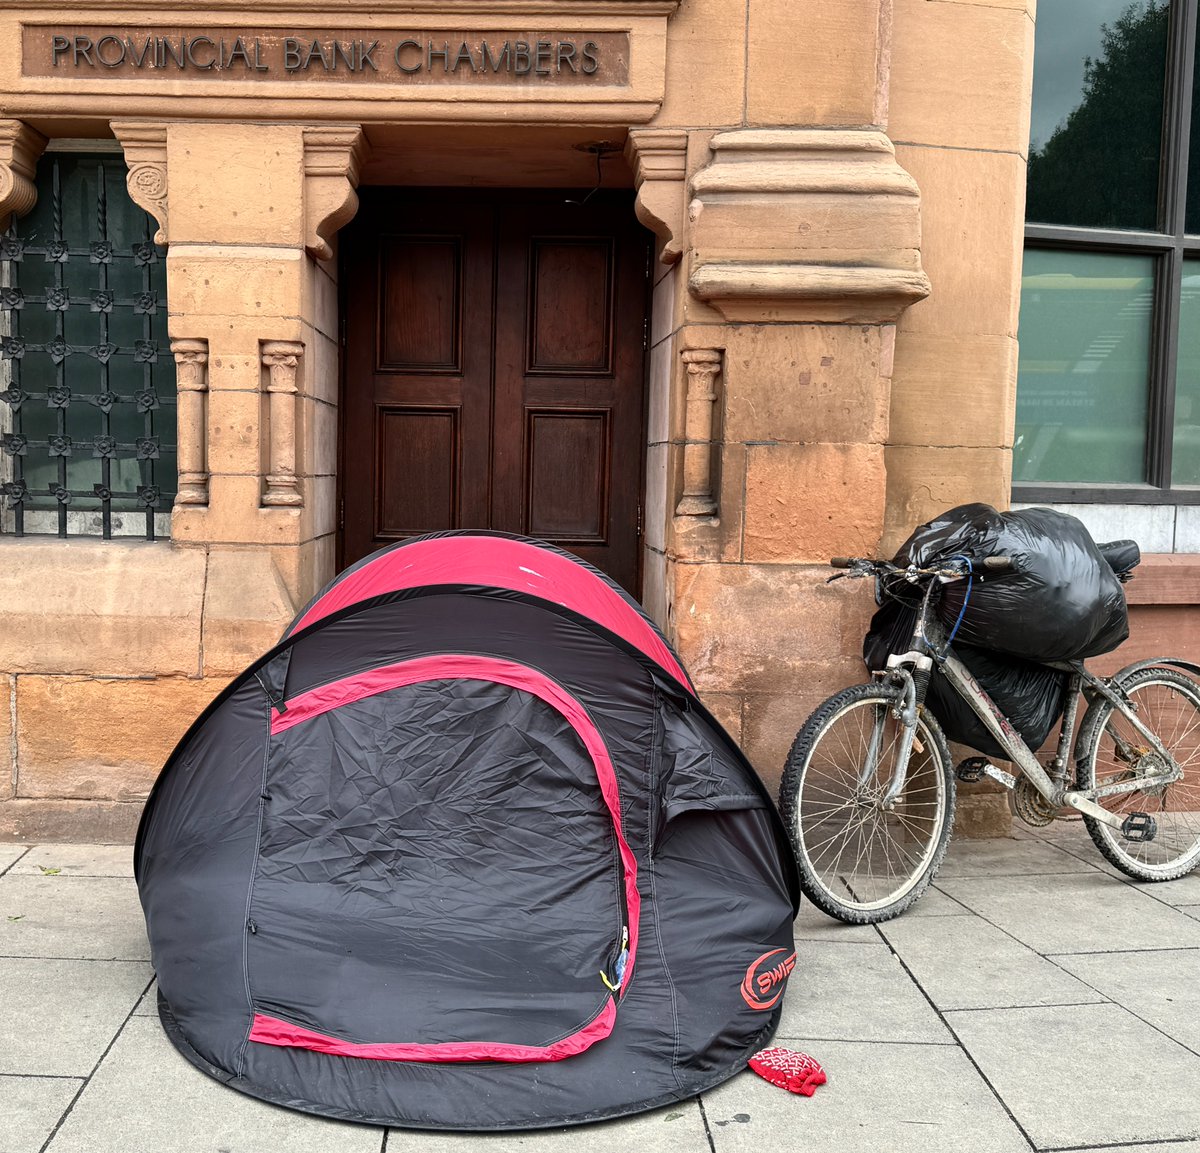 From 'Haunt' (Salmon 2015). Came to mind while walking past (now dismantled) static caravan of migrants' tents on pavement on Mount Street: very different protest by people with no homes to return to. Pic taken yesterday near College Green: somebody homeless, migrant or native.